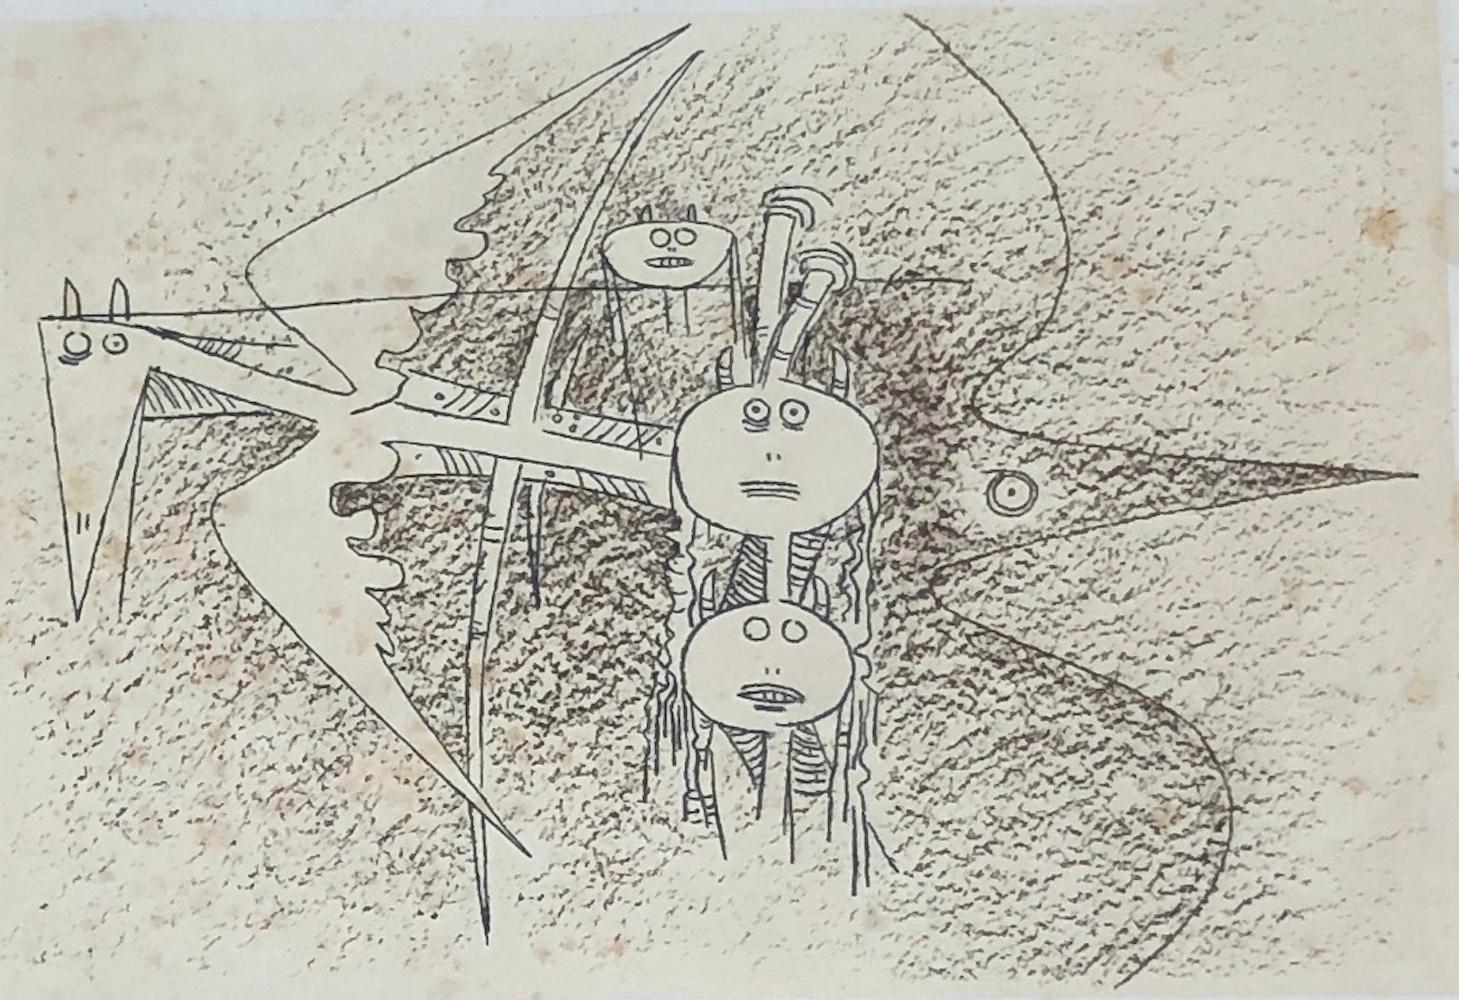 Abstract Print Wifredo Lam - Trucs et astuces